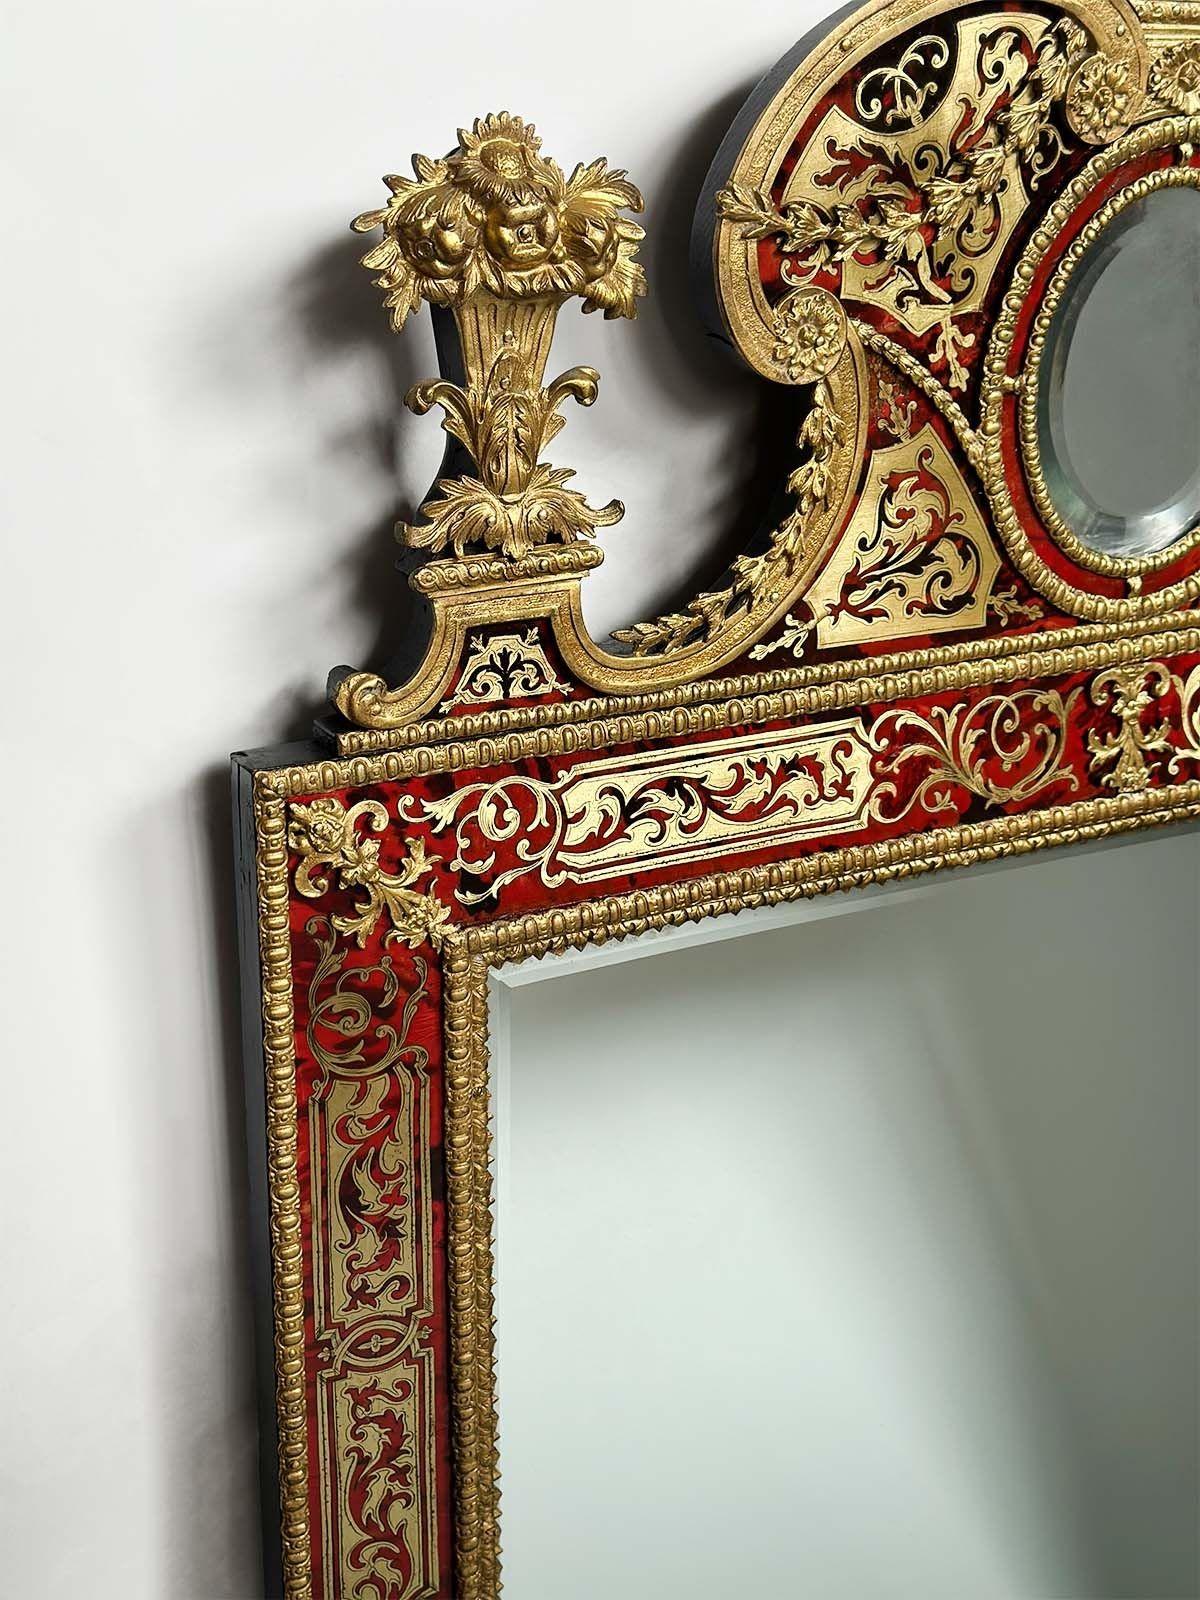 Fantastic mirror with beautiful boulle brass inlay accents and floral urn finials on top. It also consists of a center beveled glass oval mirror on top and lower rectangular beveled glass mirror. 
Made in France, 19th Century.
Dimensions:
51